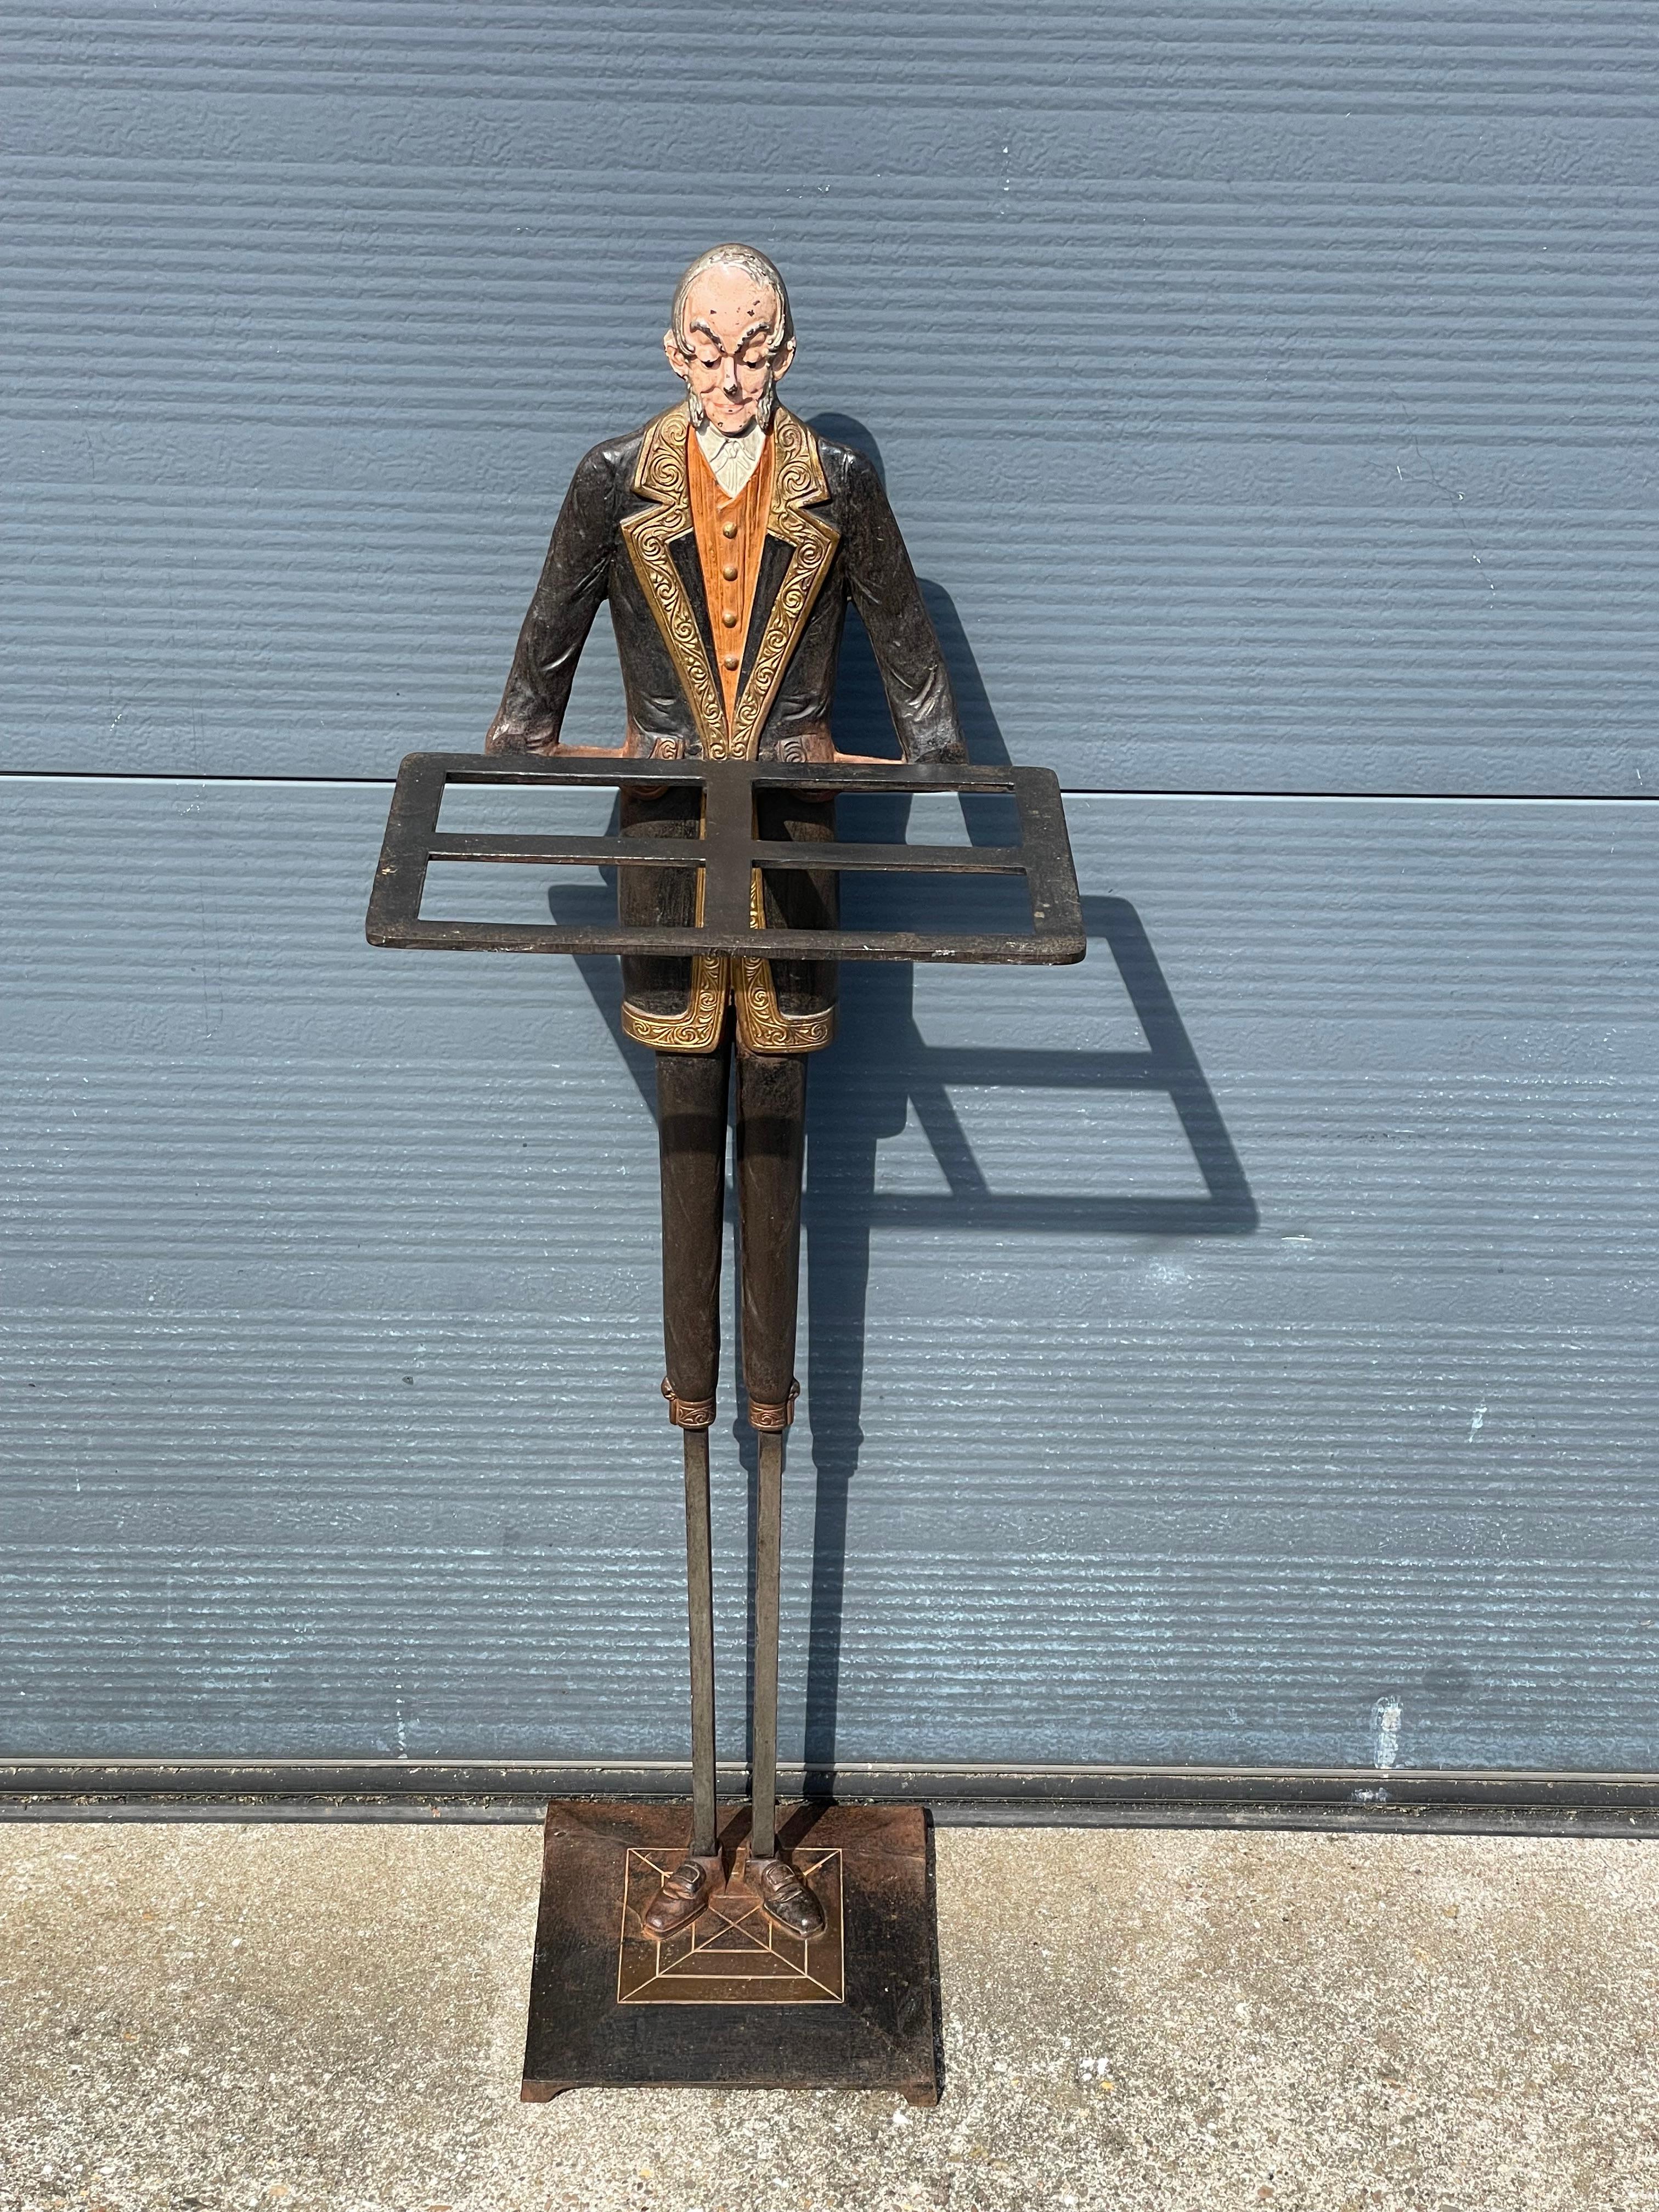 Art Deco Era, Cast Iron Tray or Umbrella Stand w. Painted Servant Sculpture 1920 For Sale 9